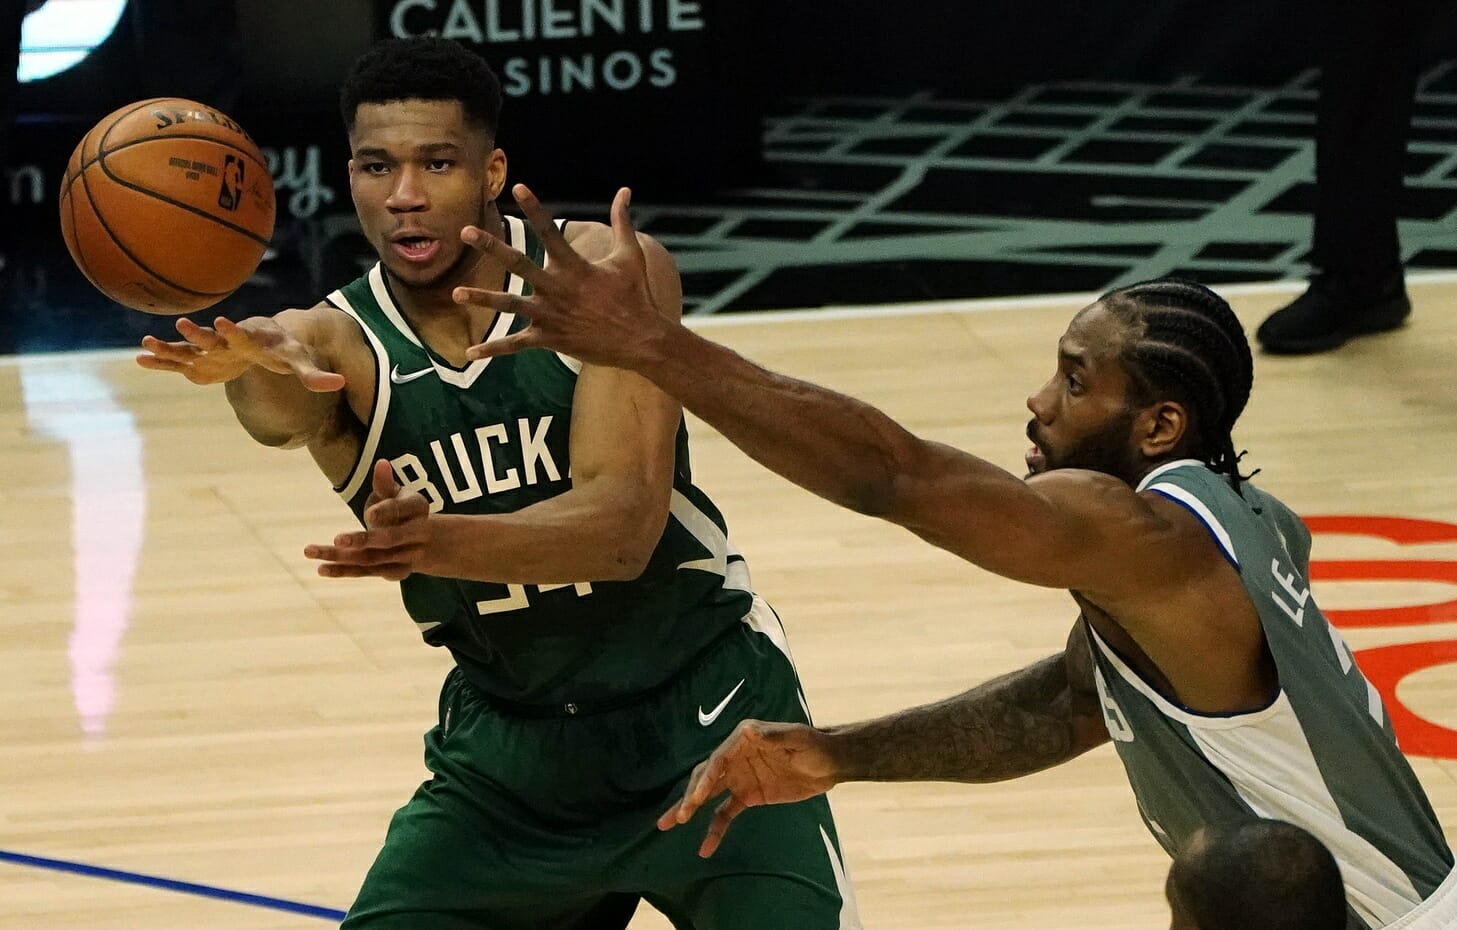 Mar 29, 2021; Los Angeles, California, USA; Milwaukee Bucks forward Giannis Antetokounmpo (34) passes against the defense of Los Angeles Clippers forward Kawhi Leonard (2) during the first half at Staples Center. Mandatory Credit: Gary A. Vasquez-USA TODAY Sports (NBA RUmors)